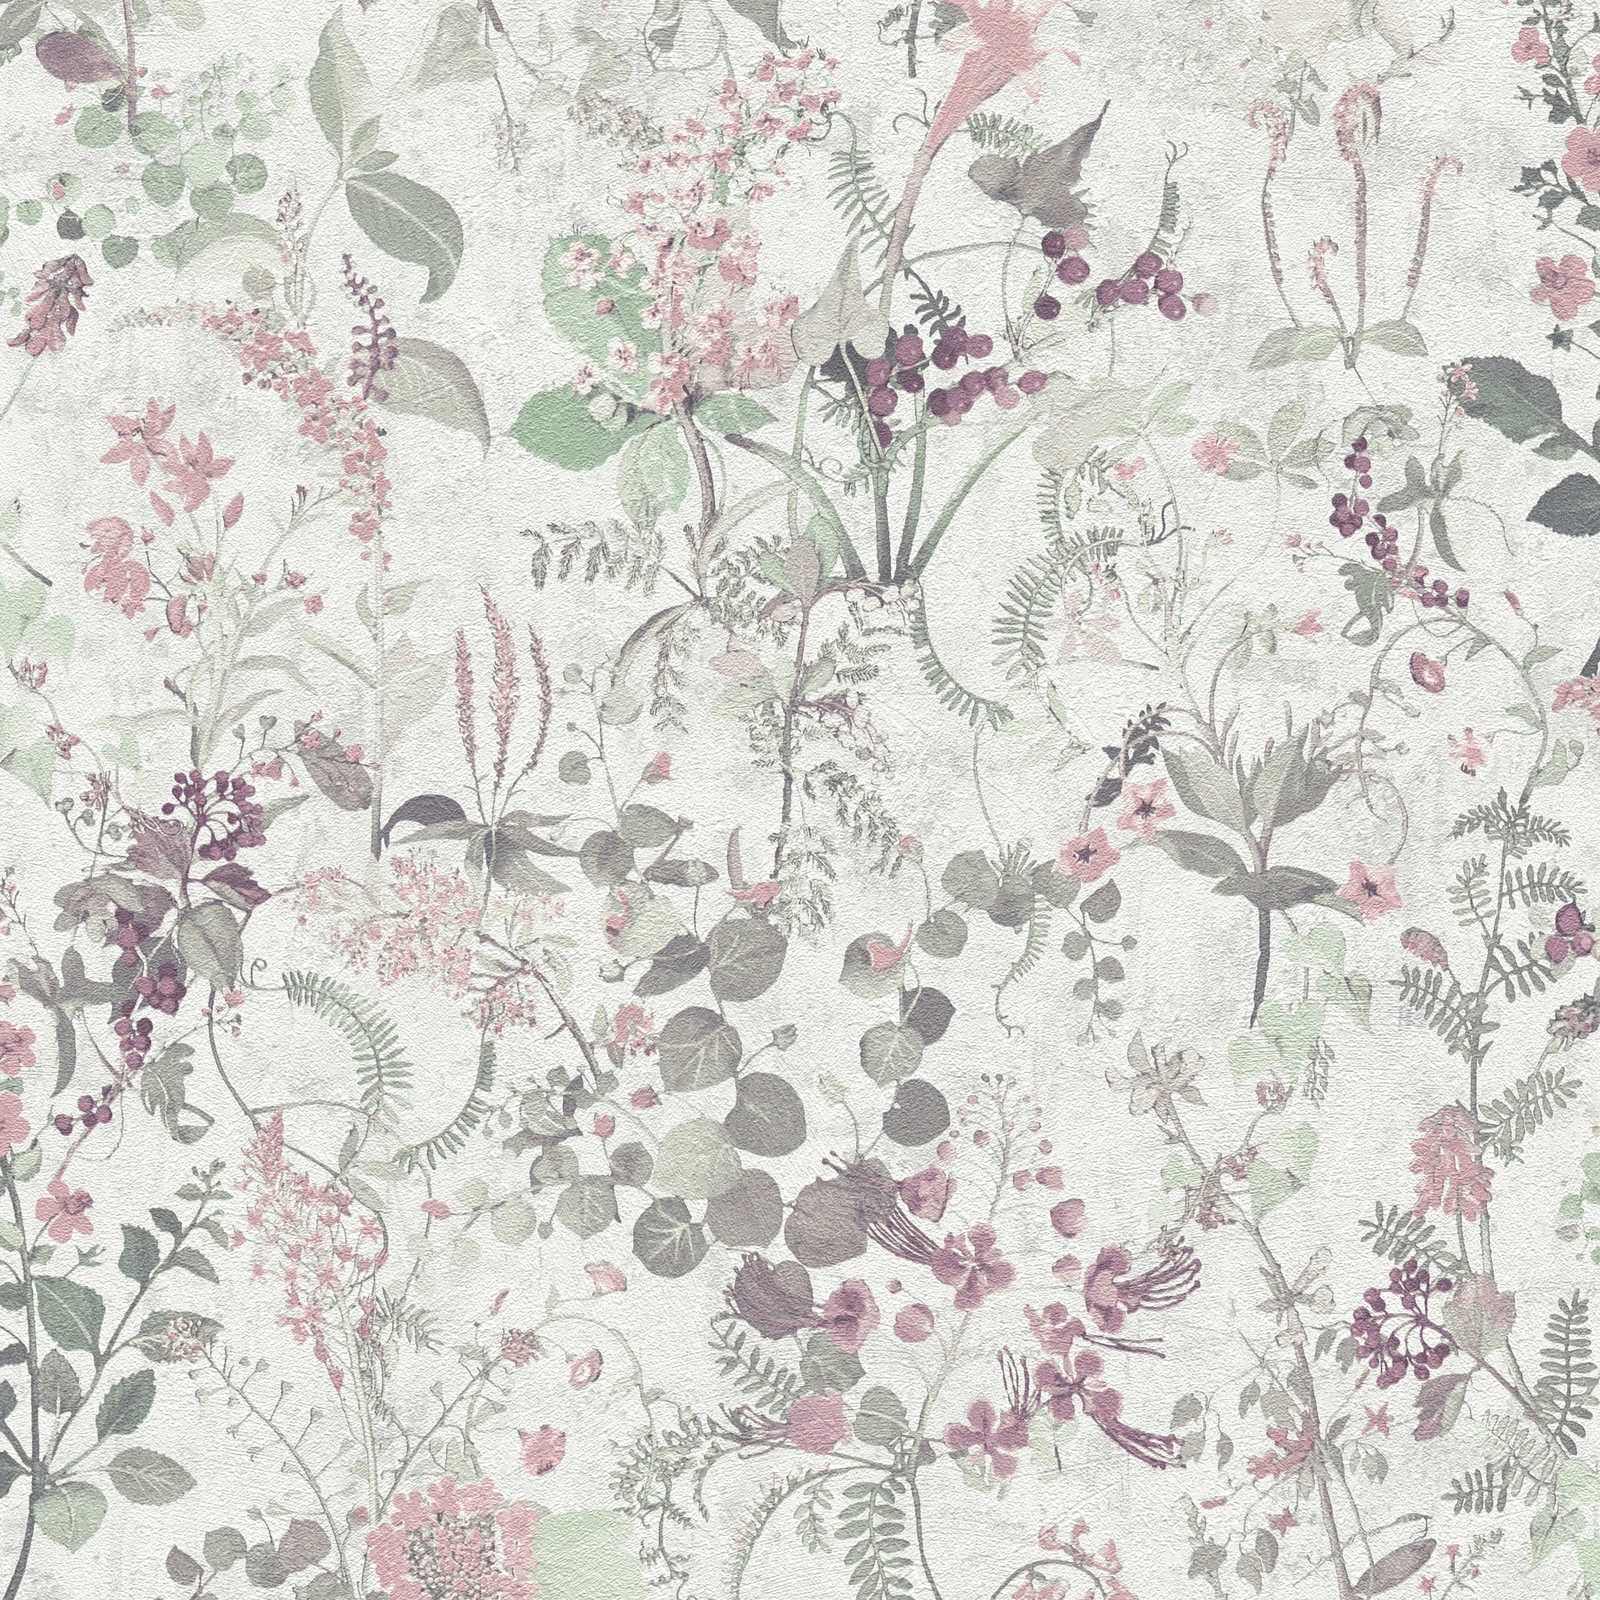 The Bos - Flowers & Berries botanical wallpaper AS Creation Roll Pink  388251